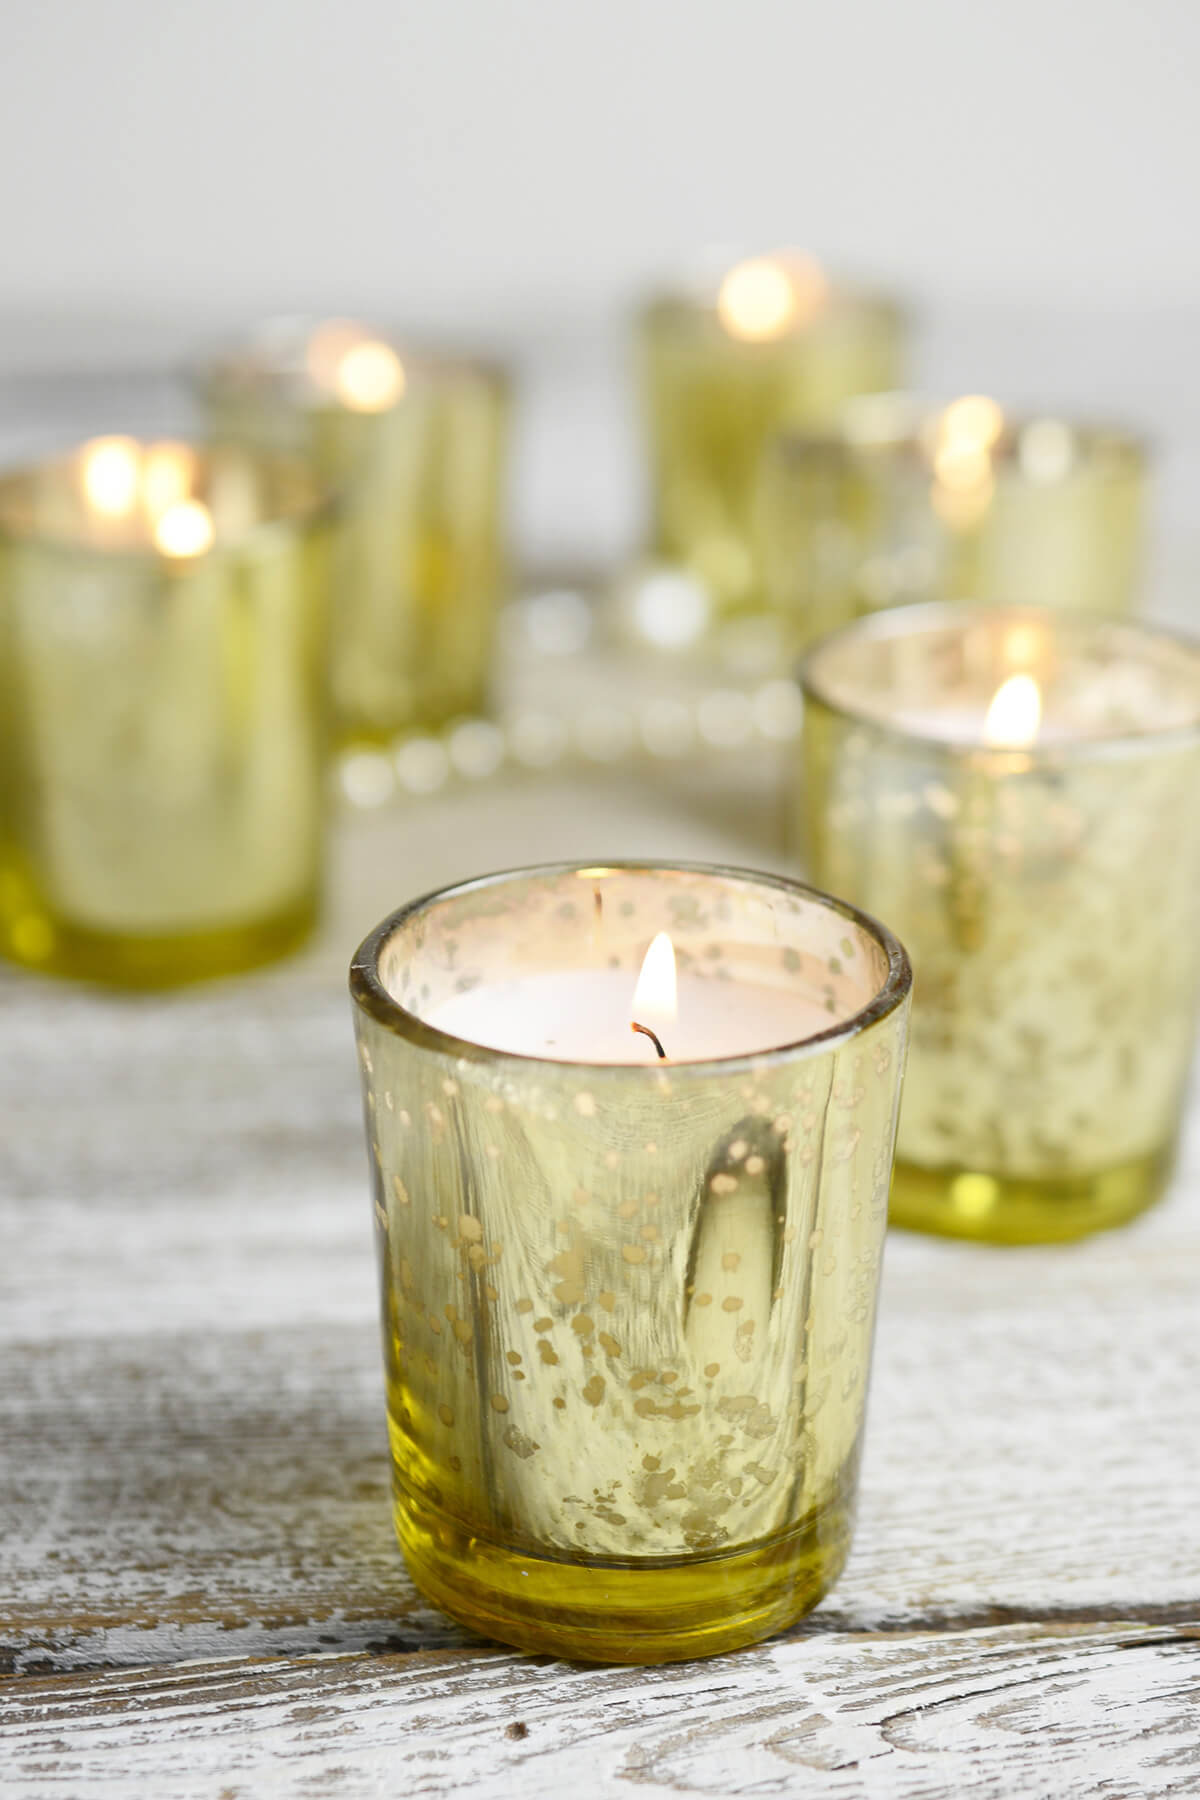 12 Gold Mercury Glass Votive Holders and 12 White Unscented Candles